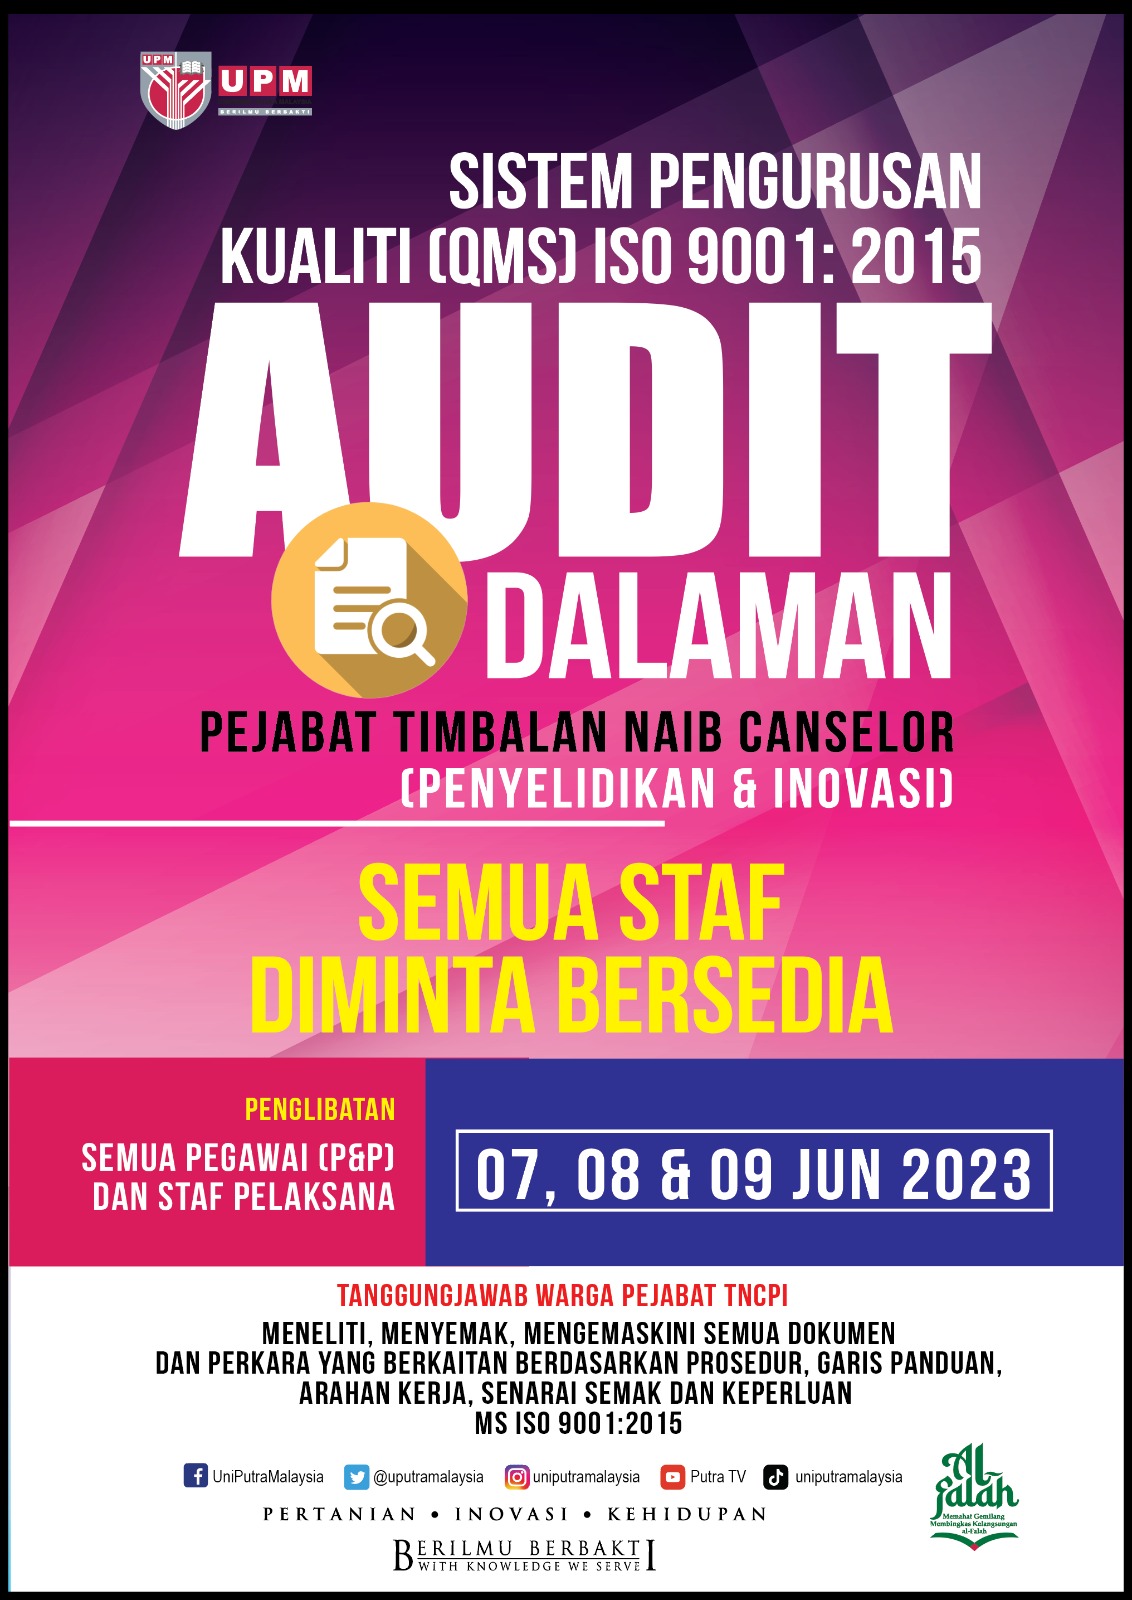 Office of the Deputy Vice-Chancellor (Research &Innovation) facing Internal Audit of QMS ISO 1900: 2015 Quality Management System